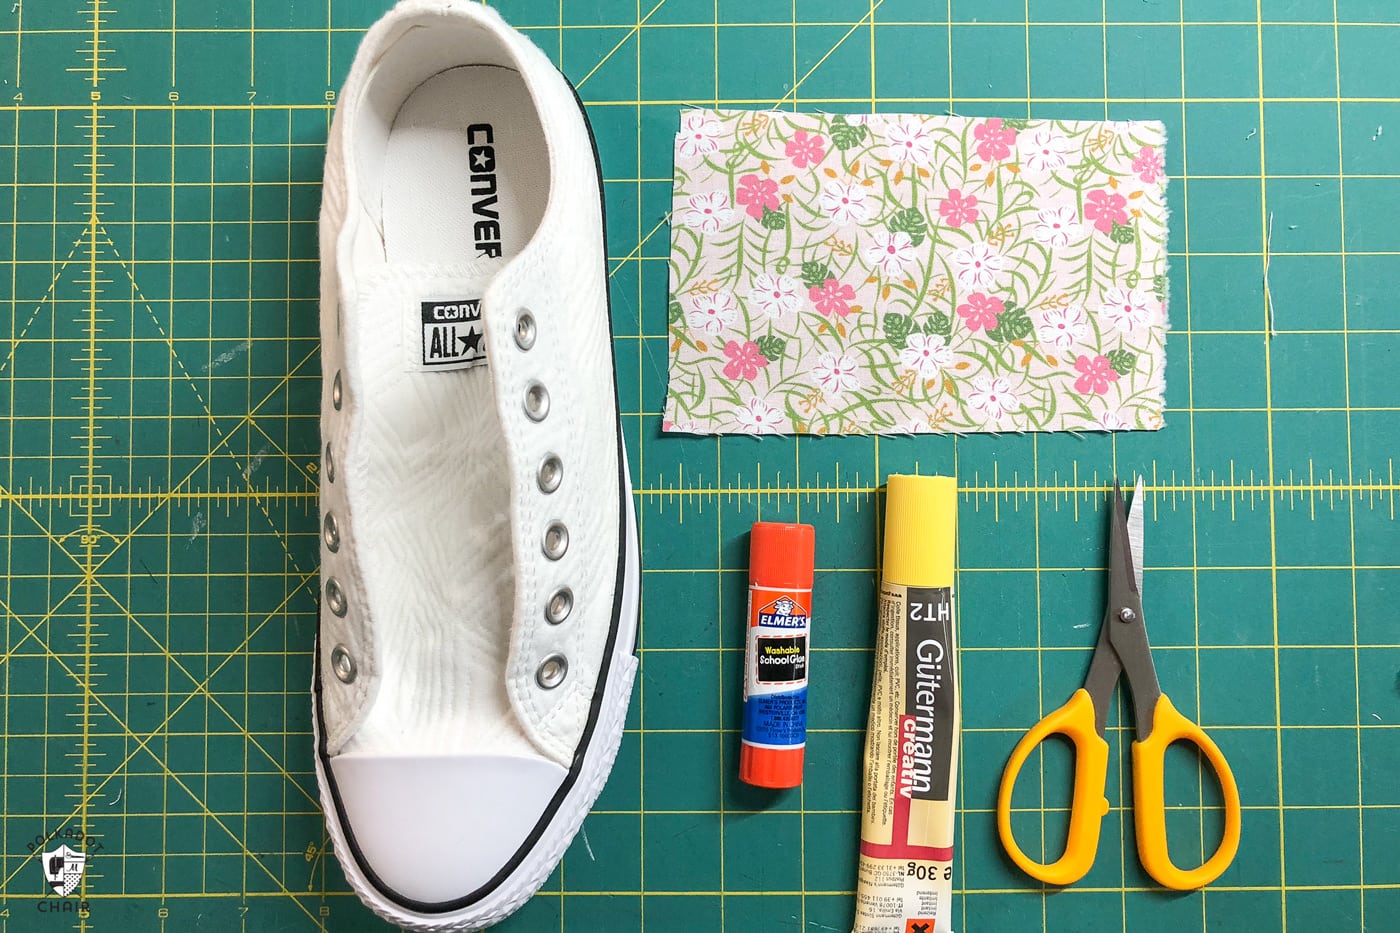 Supplies to add fabric to converse shoes